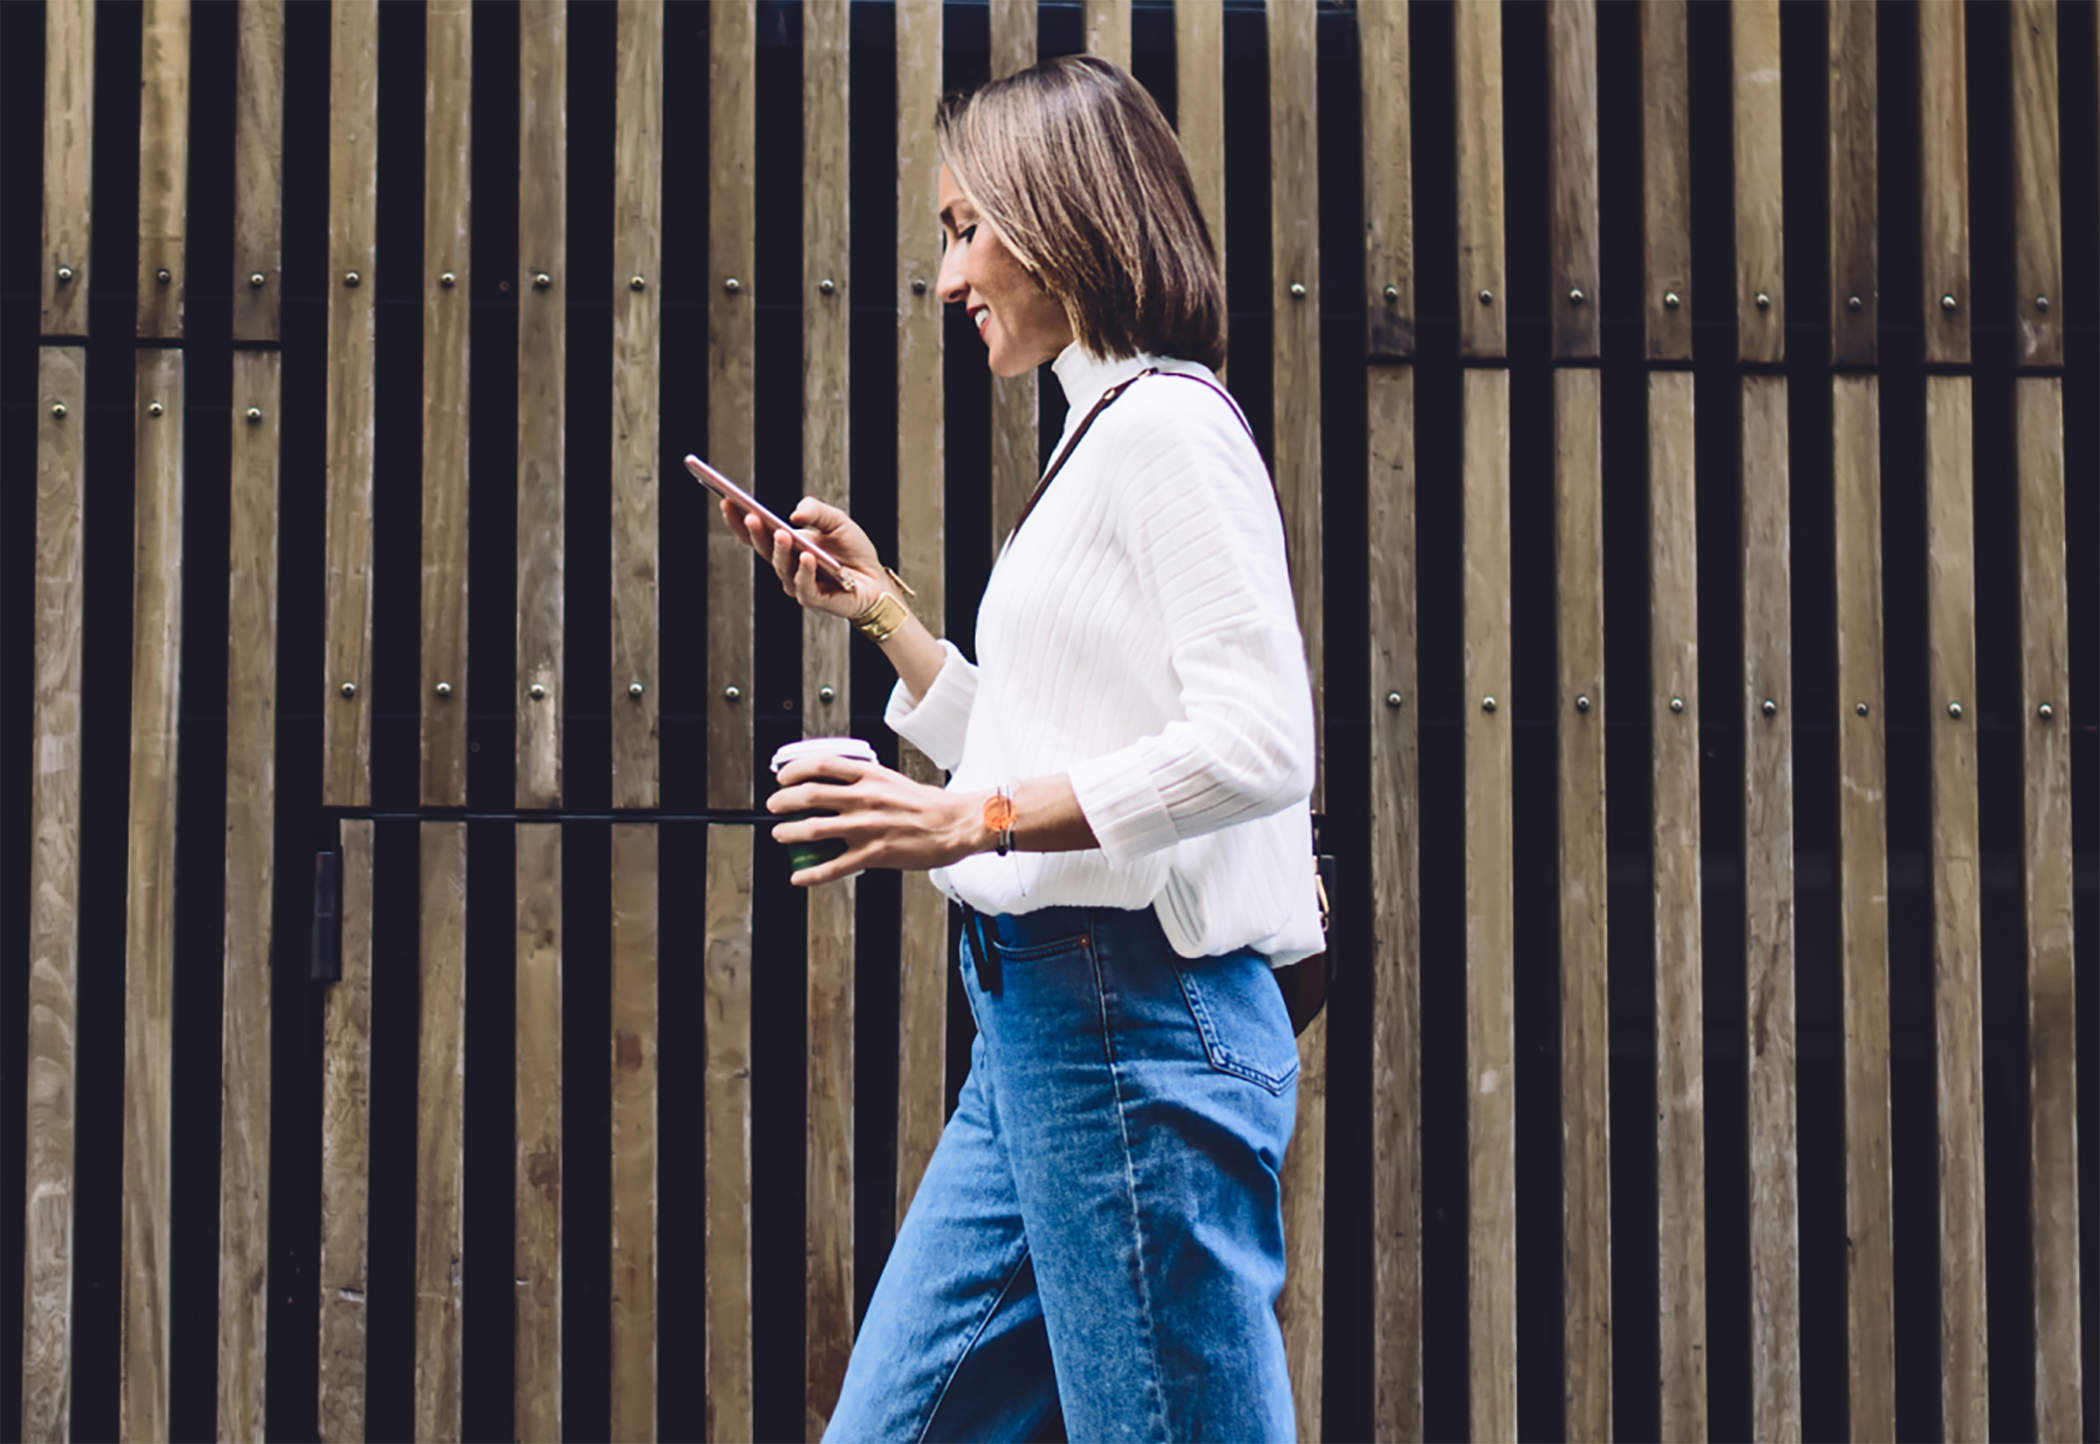 Woman walking and using a phone outside